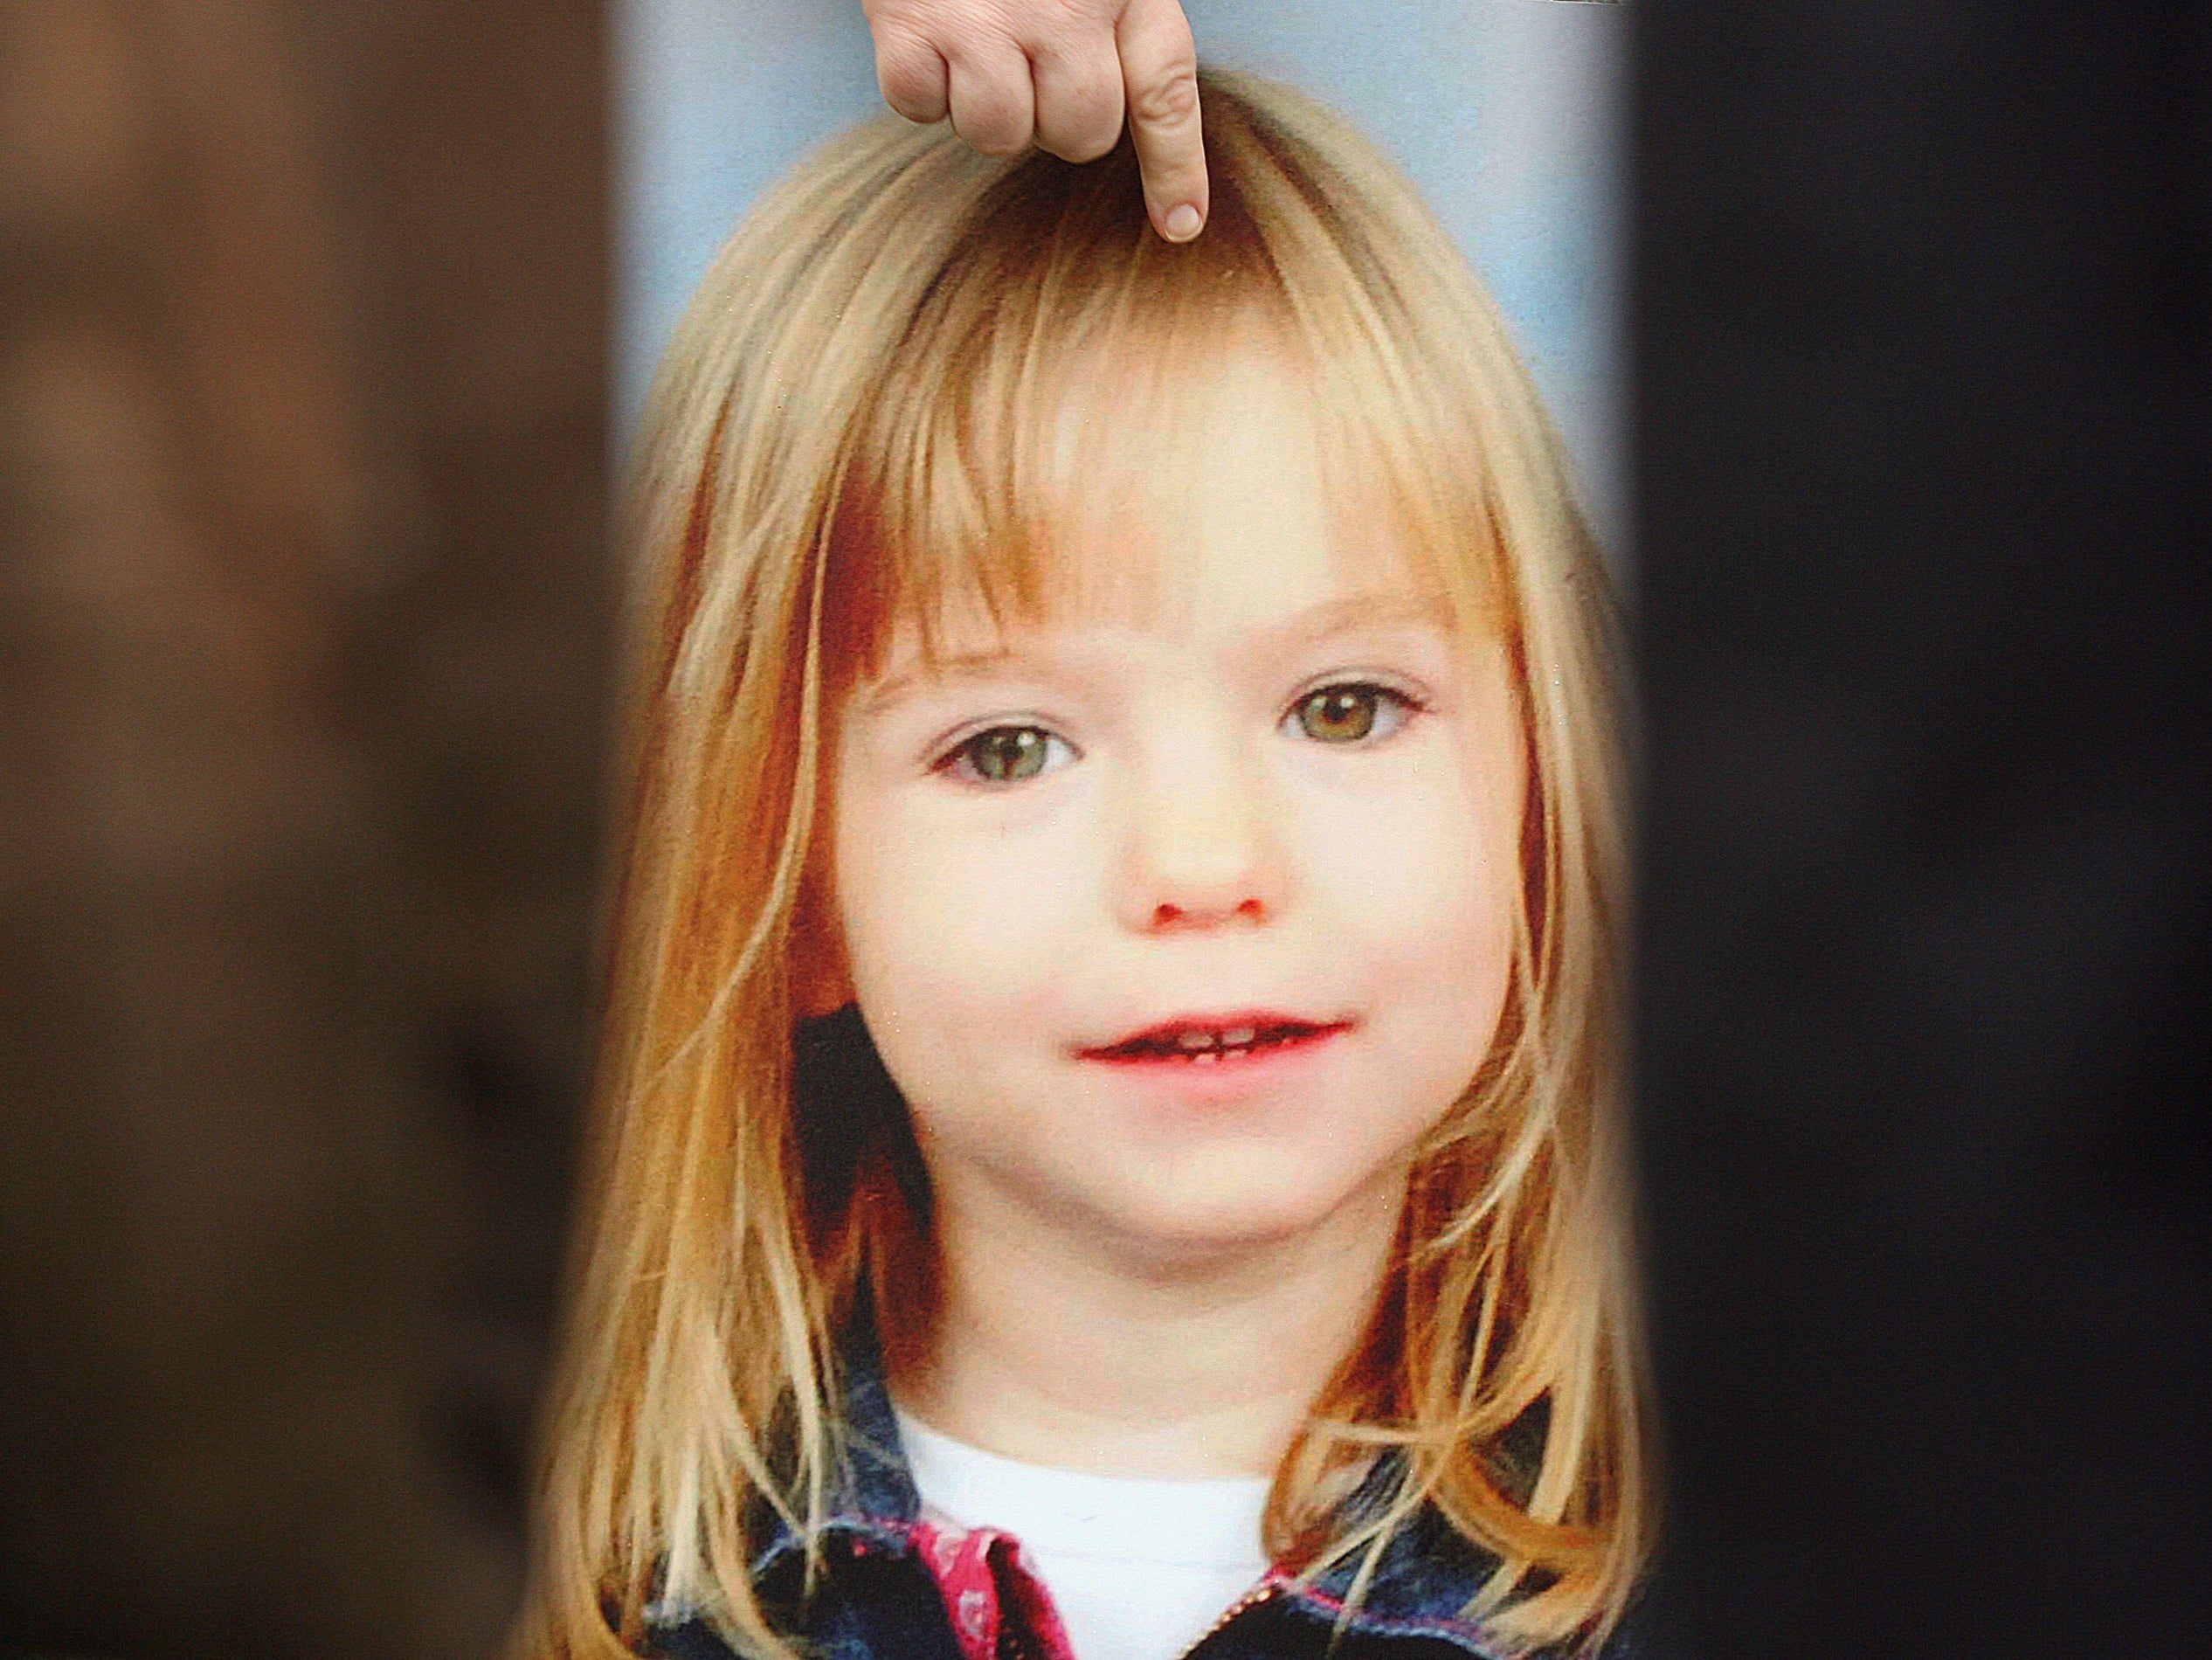 A picture of Madeleine McCann, who disappeared from a holiday complex in Praia da Luz in 2007